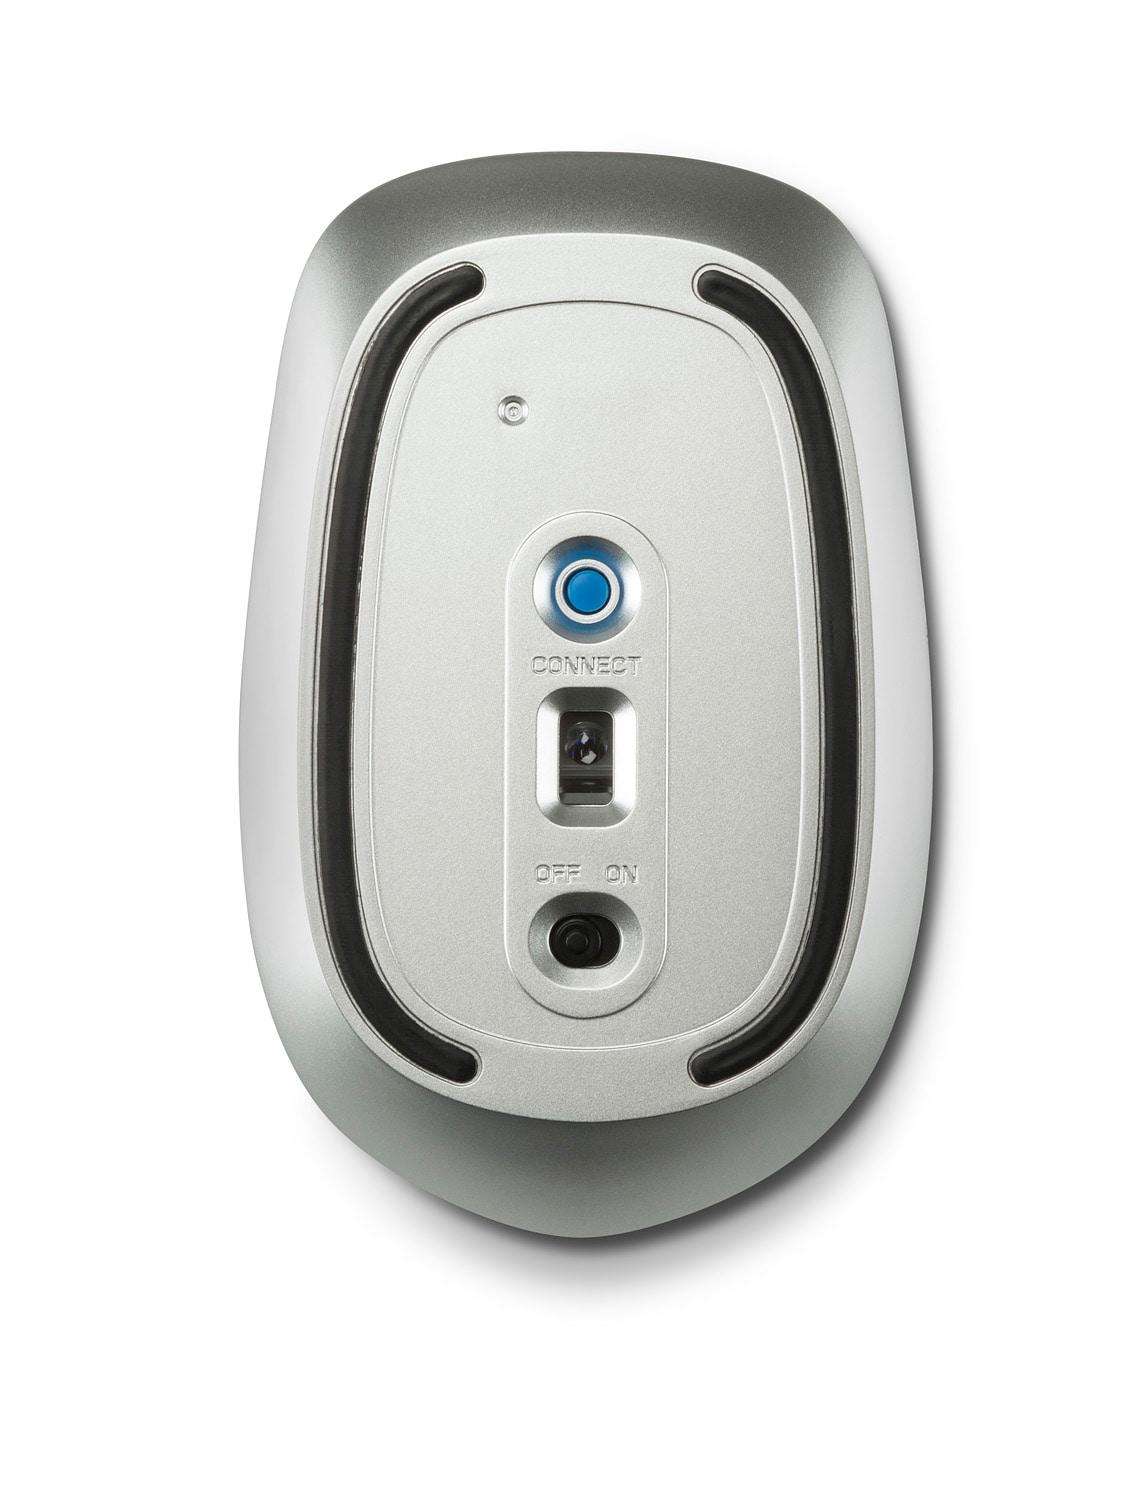 Bore Learning Twinkle HP Wireless Mouse Z4000 | HP® Africa